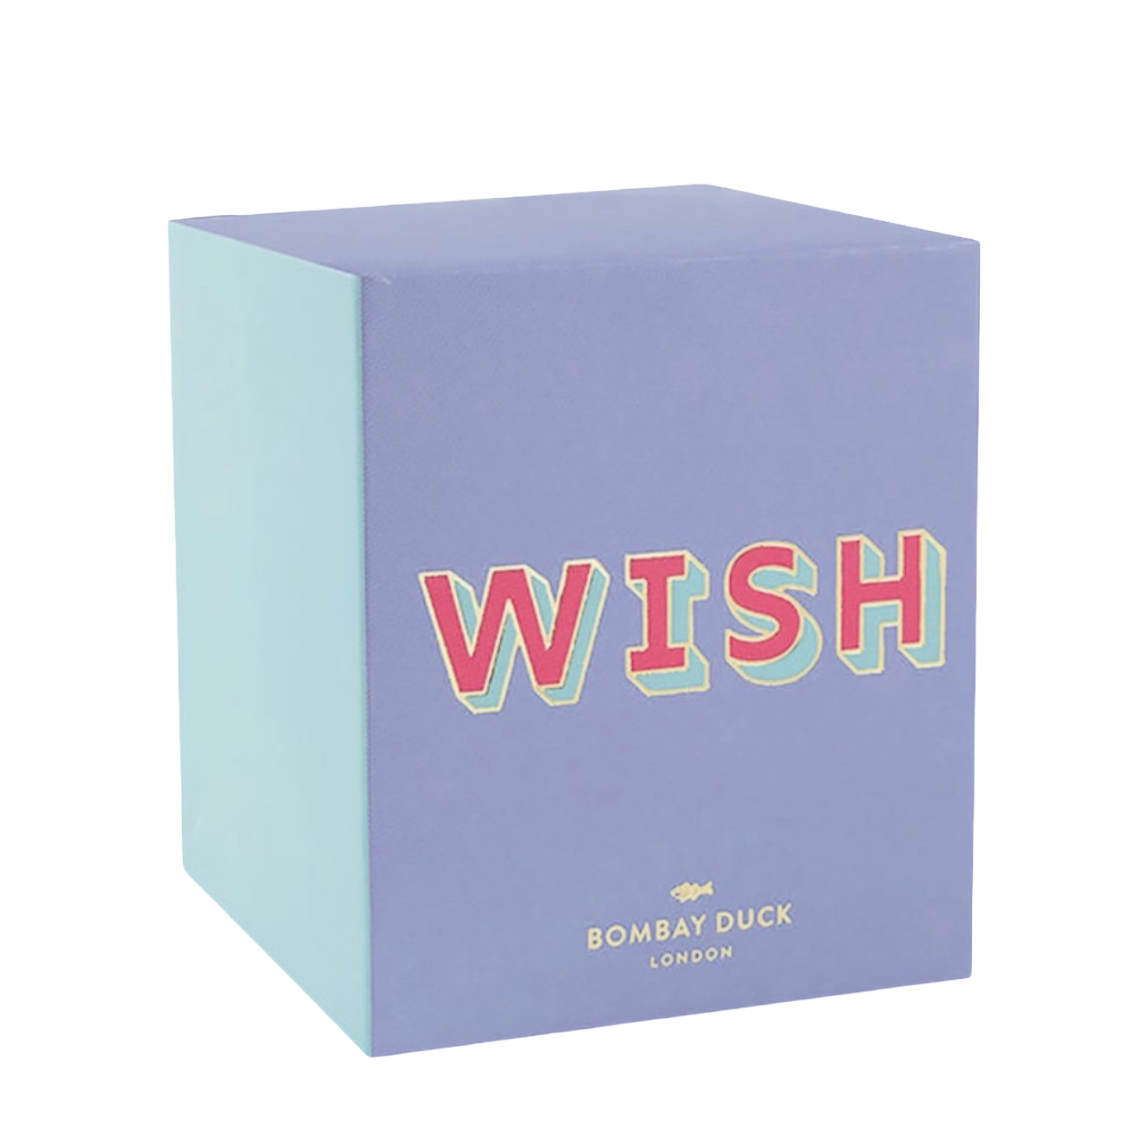 Letterpop Fragranced Candle WISH